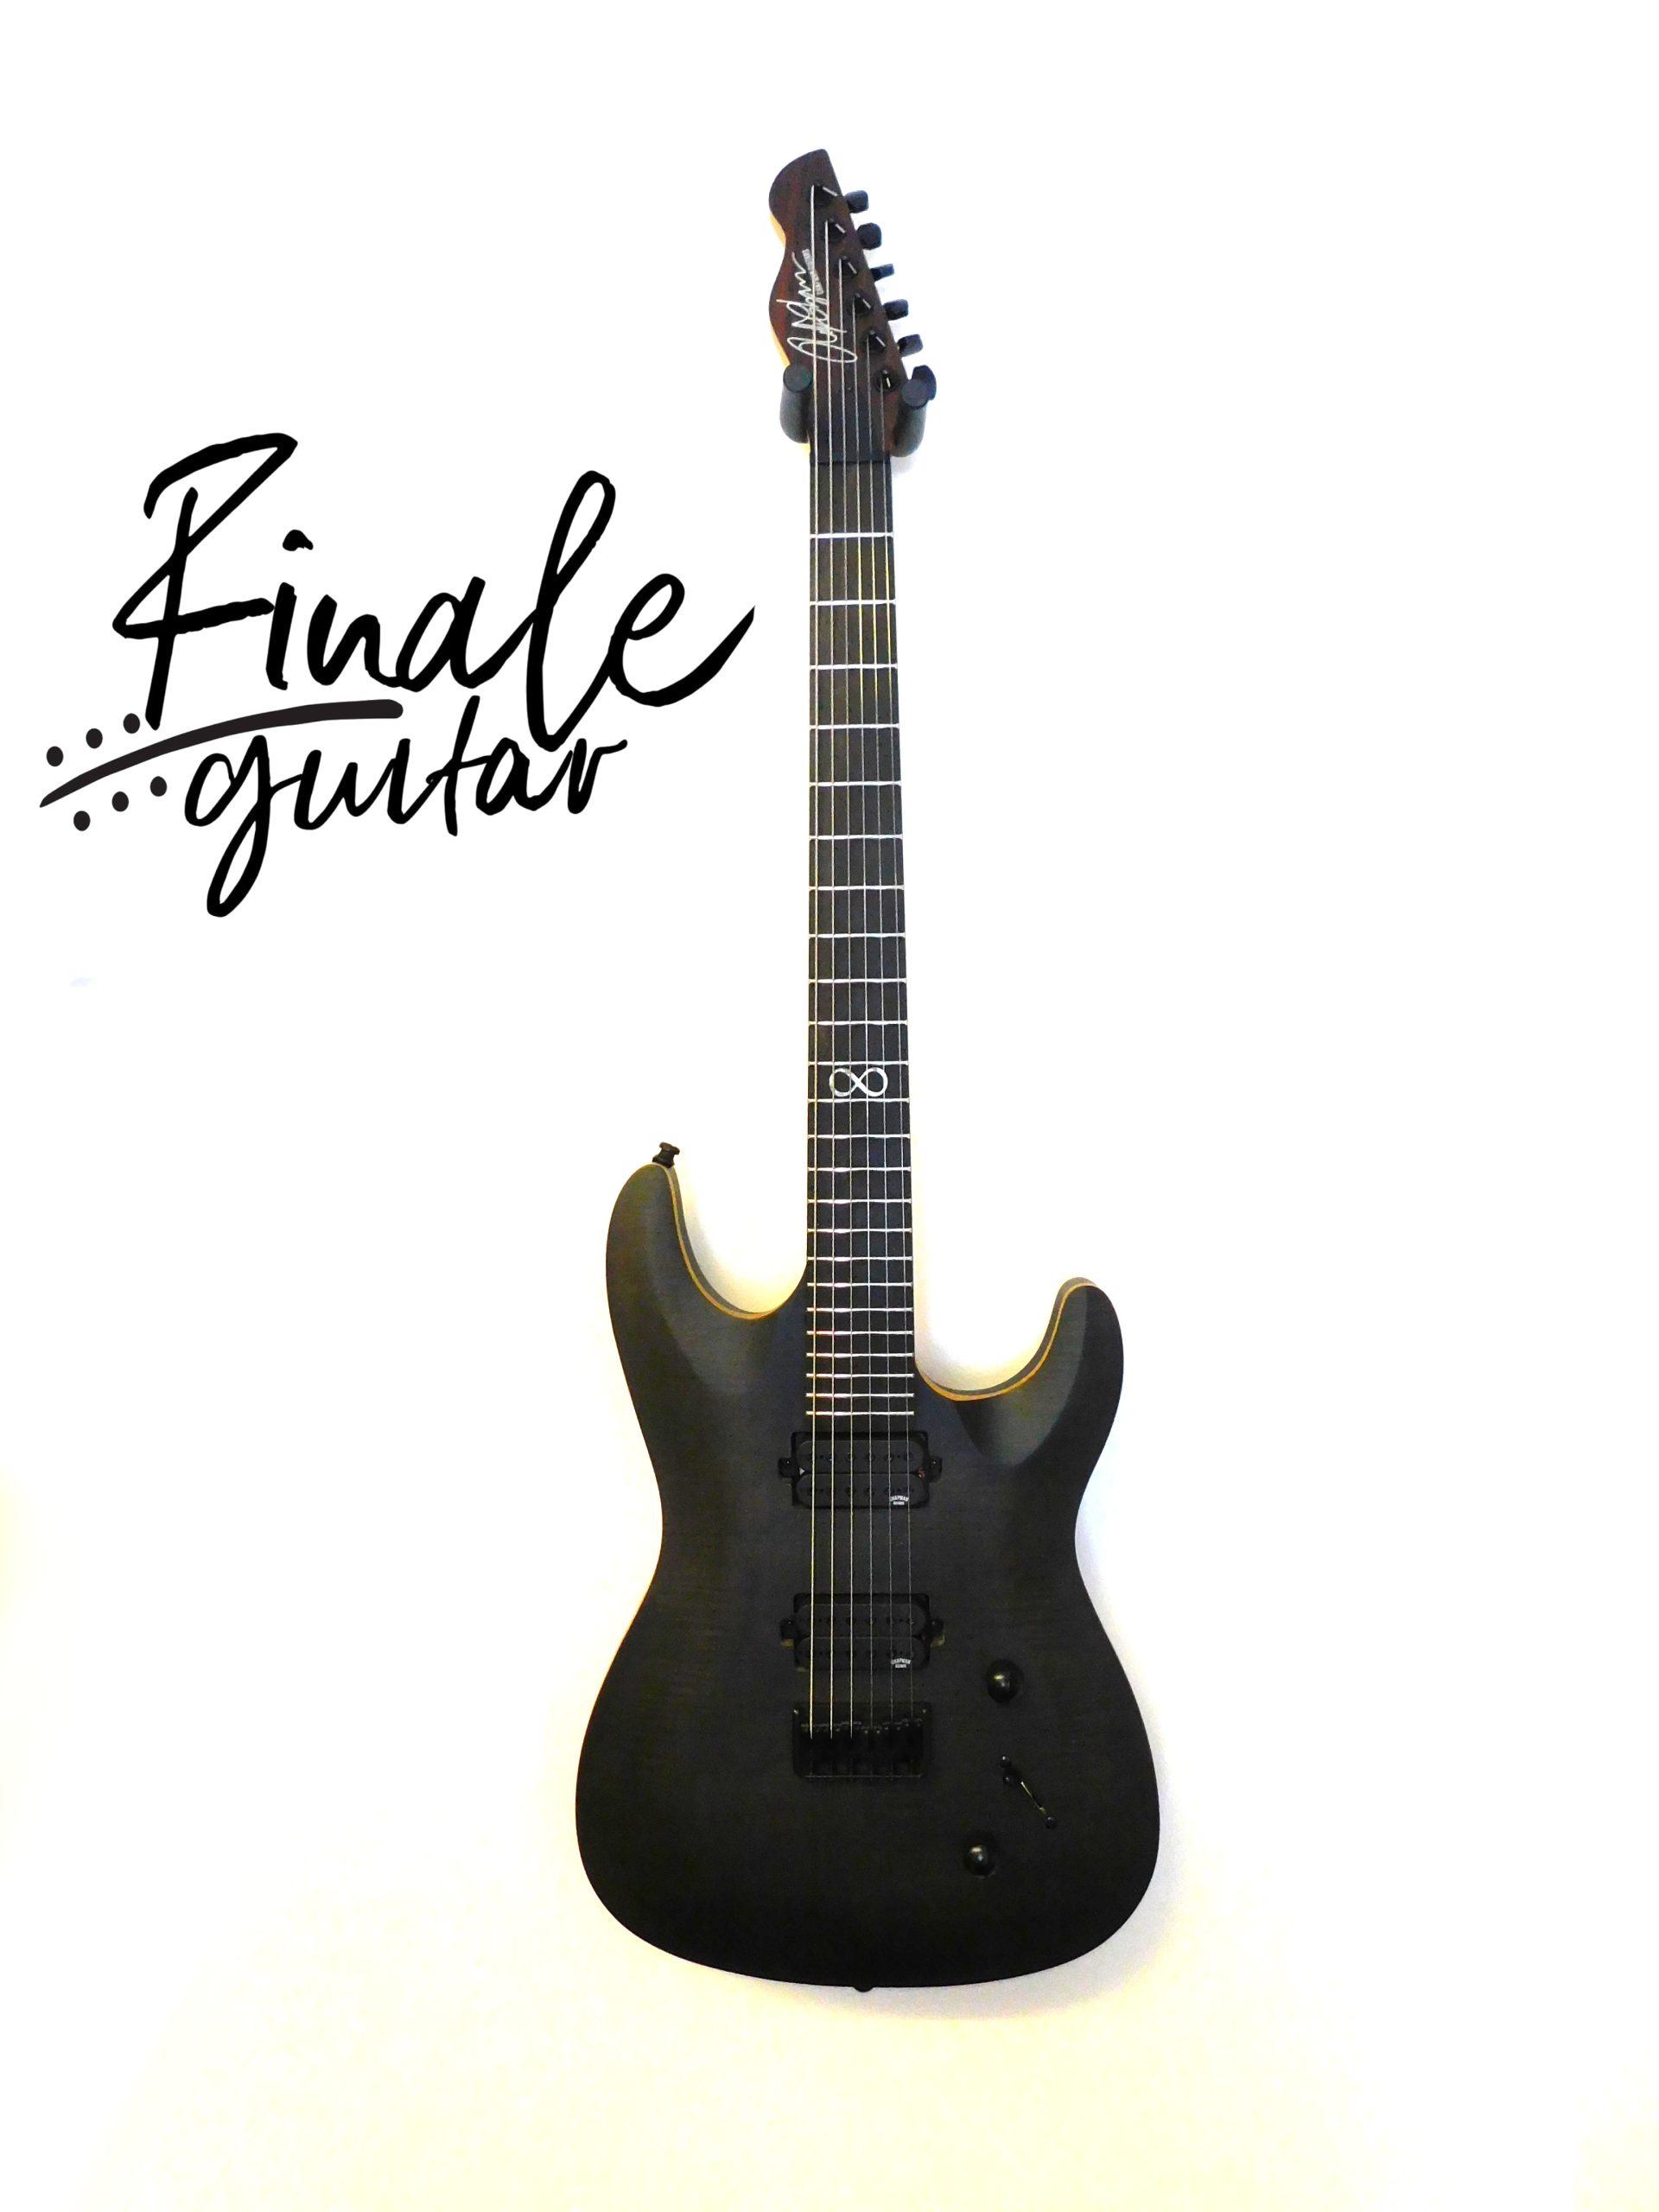 Chapman ML1 Pro Modern with Chapman fitted hard case for sale in our Sheffield guitar shop, Finale Guitar